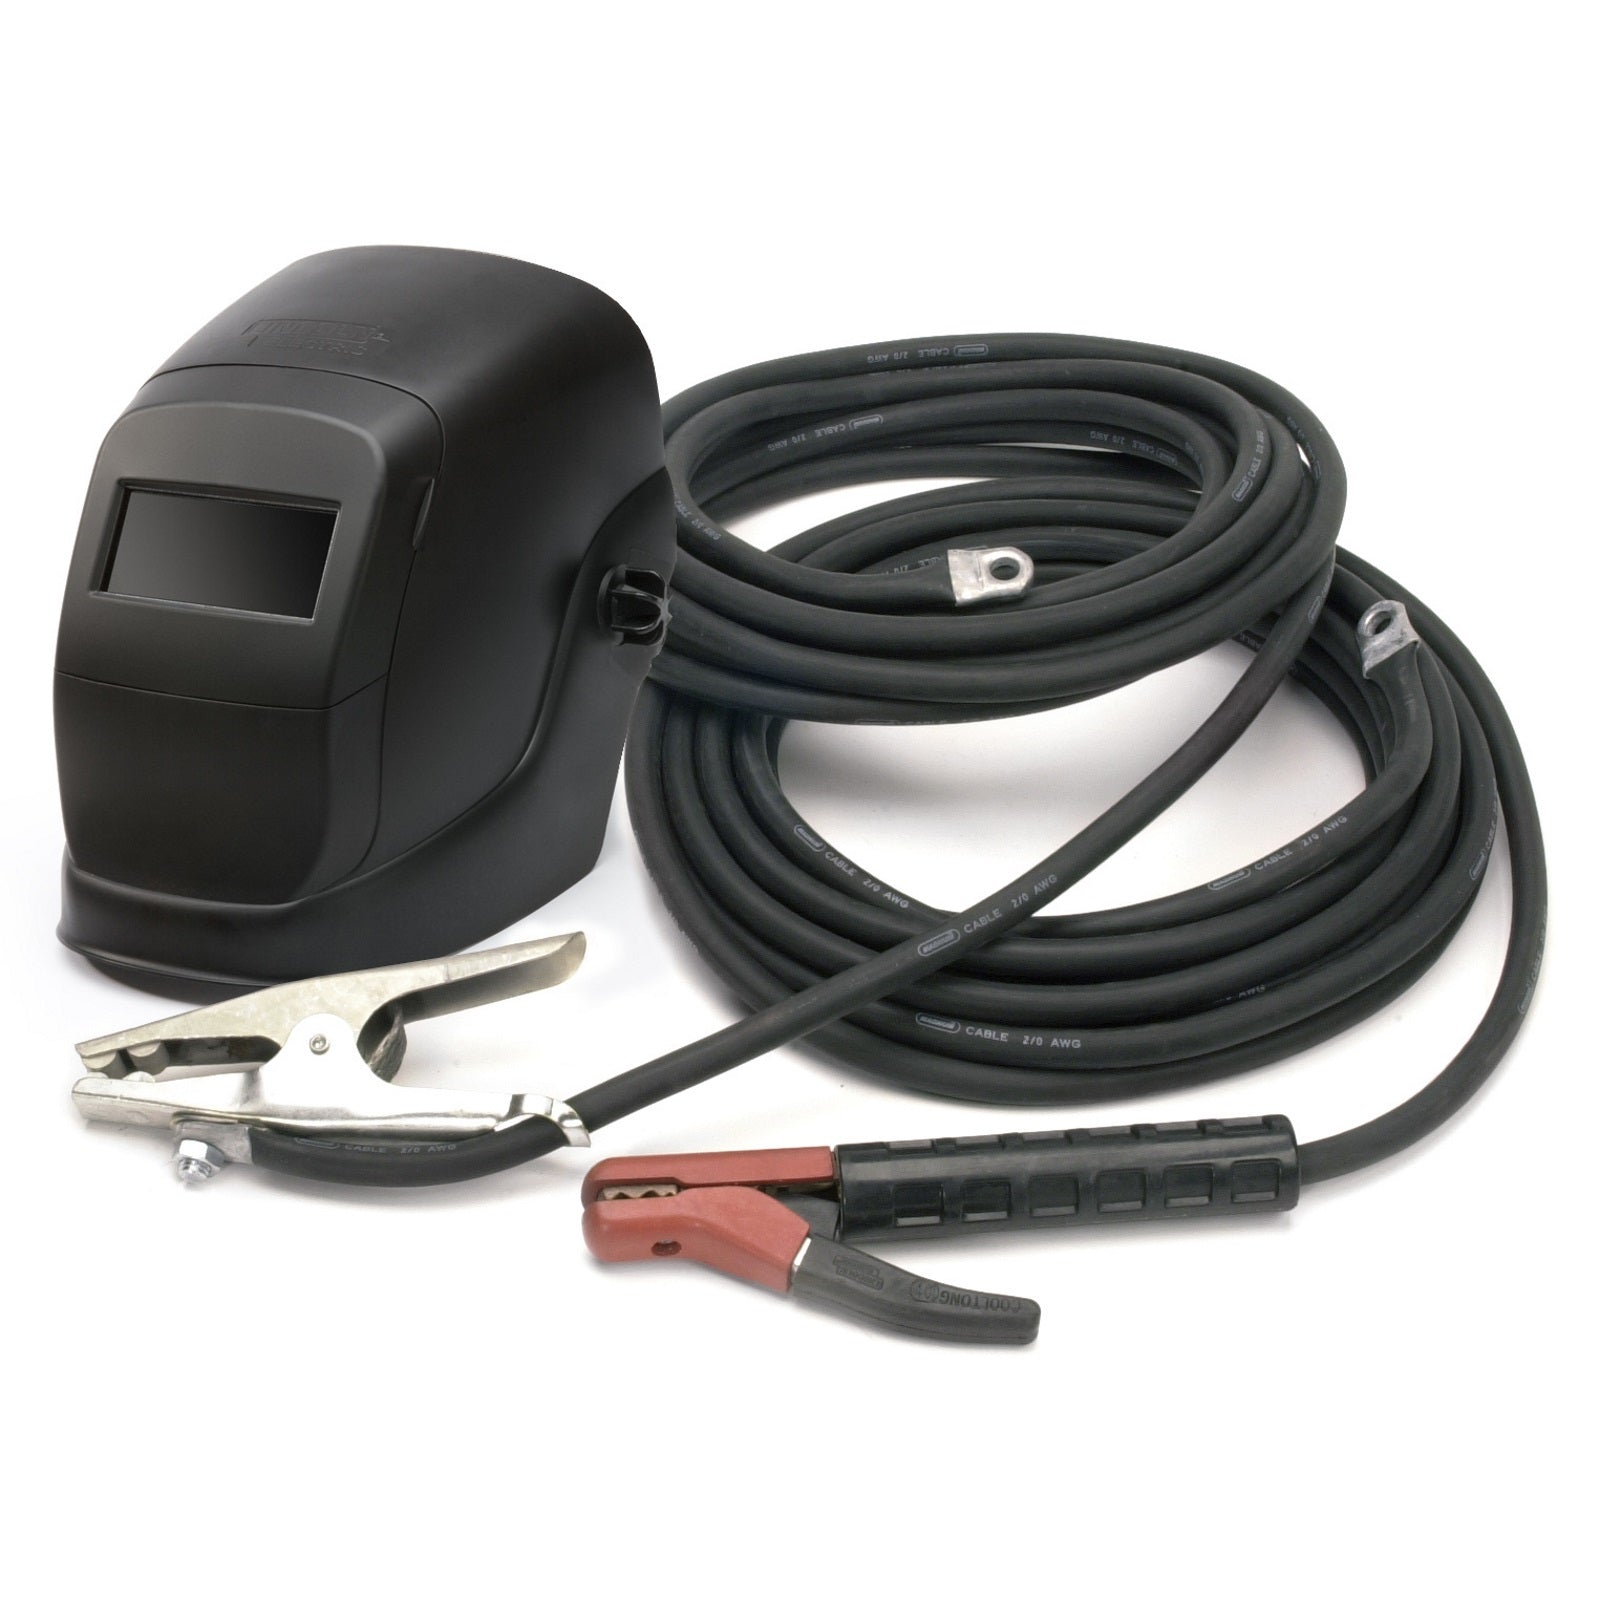 Lincoln Accessory Kit - 400 Amp (K704)